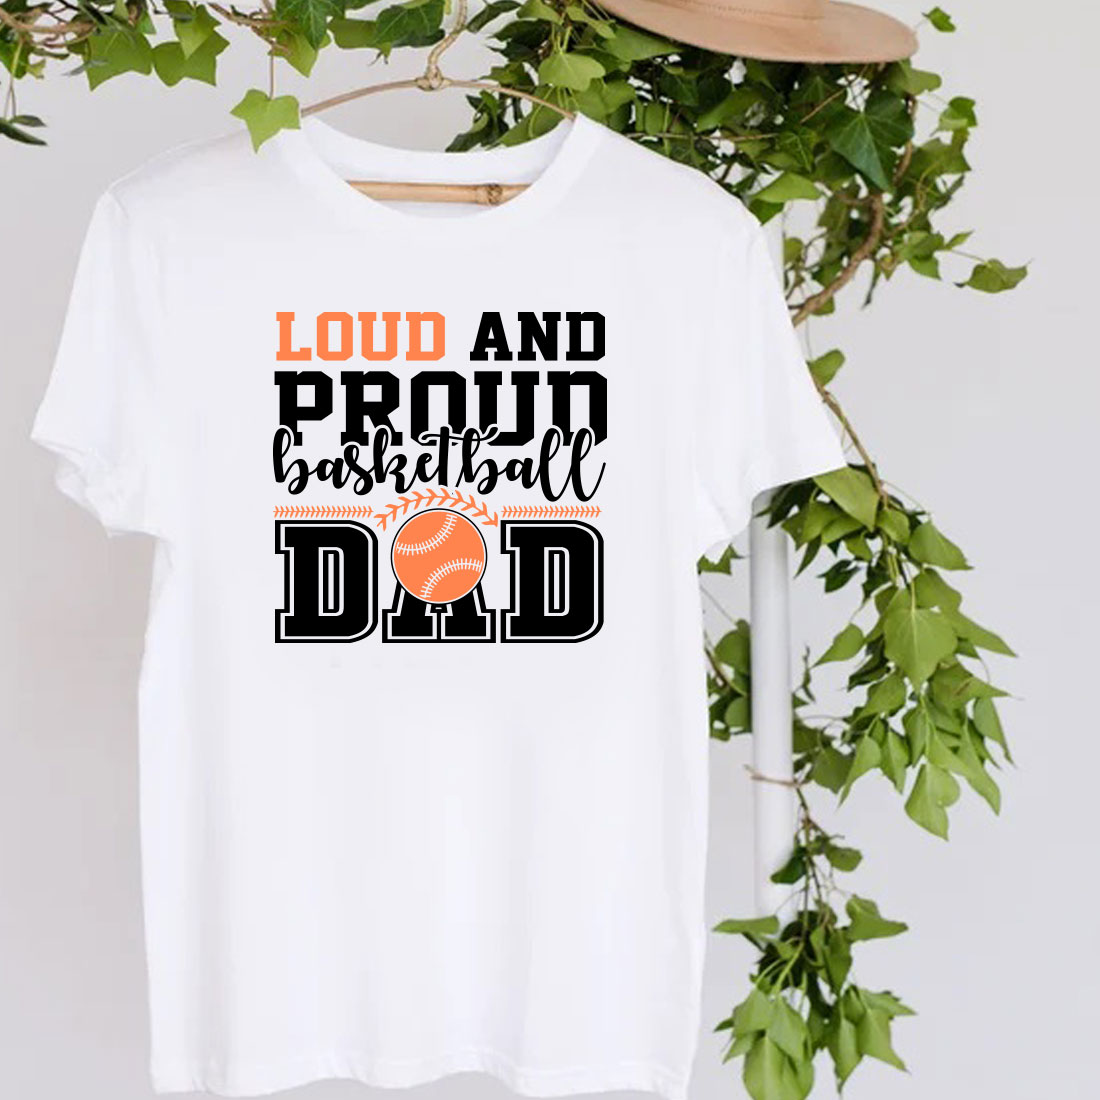 T - shirt that says loud and proud basketball dad.